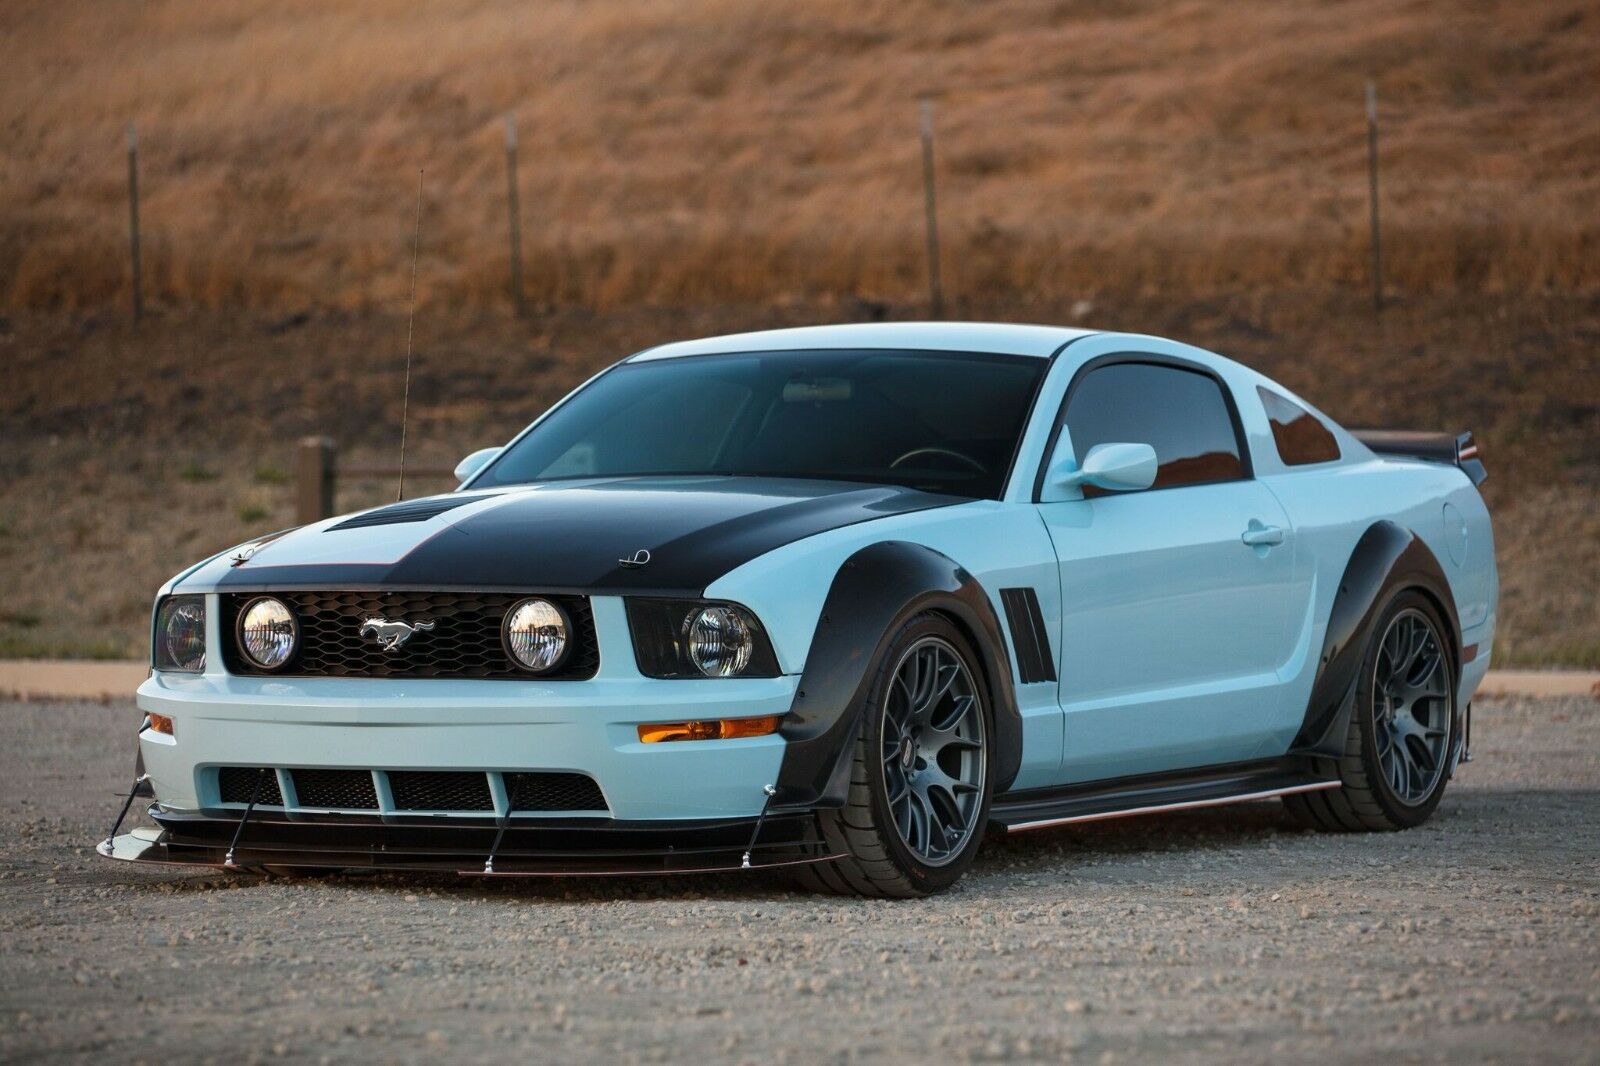 Mustang Of The Day: Carbon Fiber 2005 Ford Mustang GT